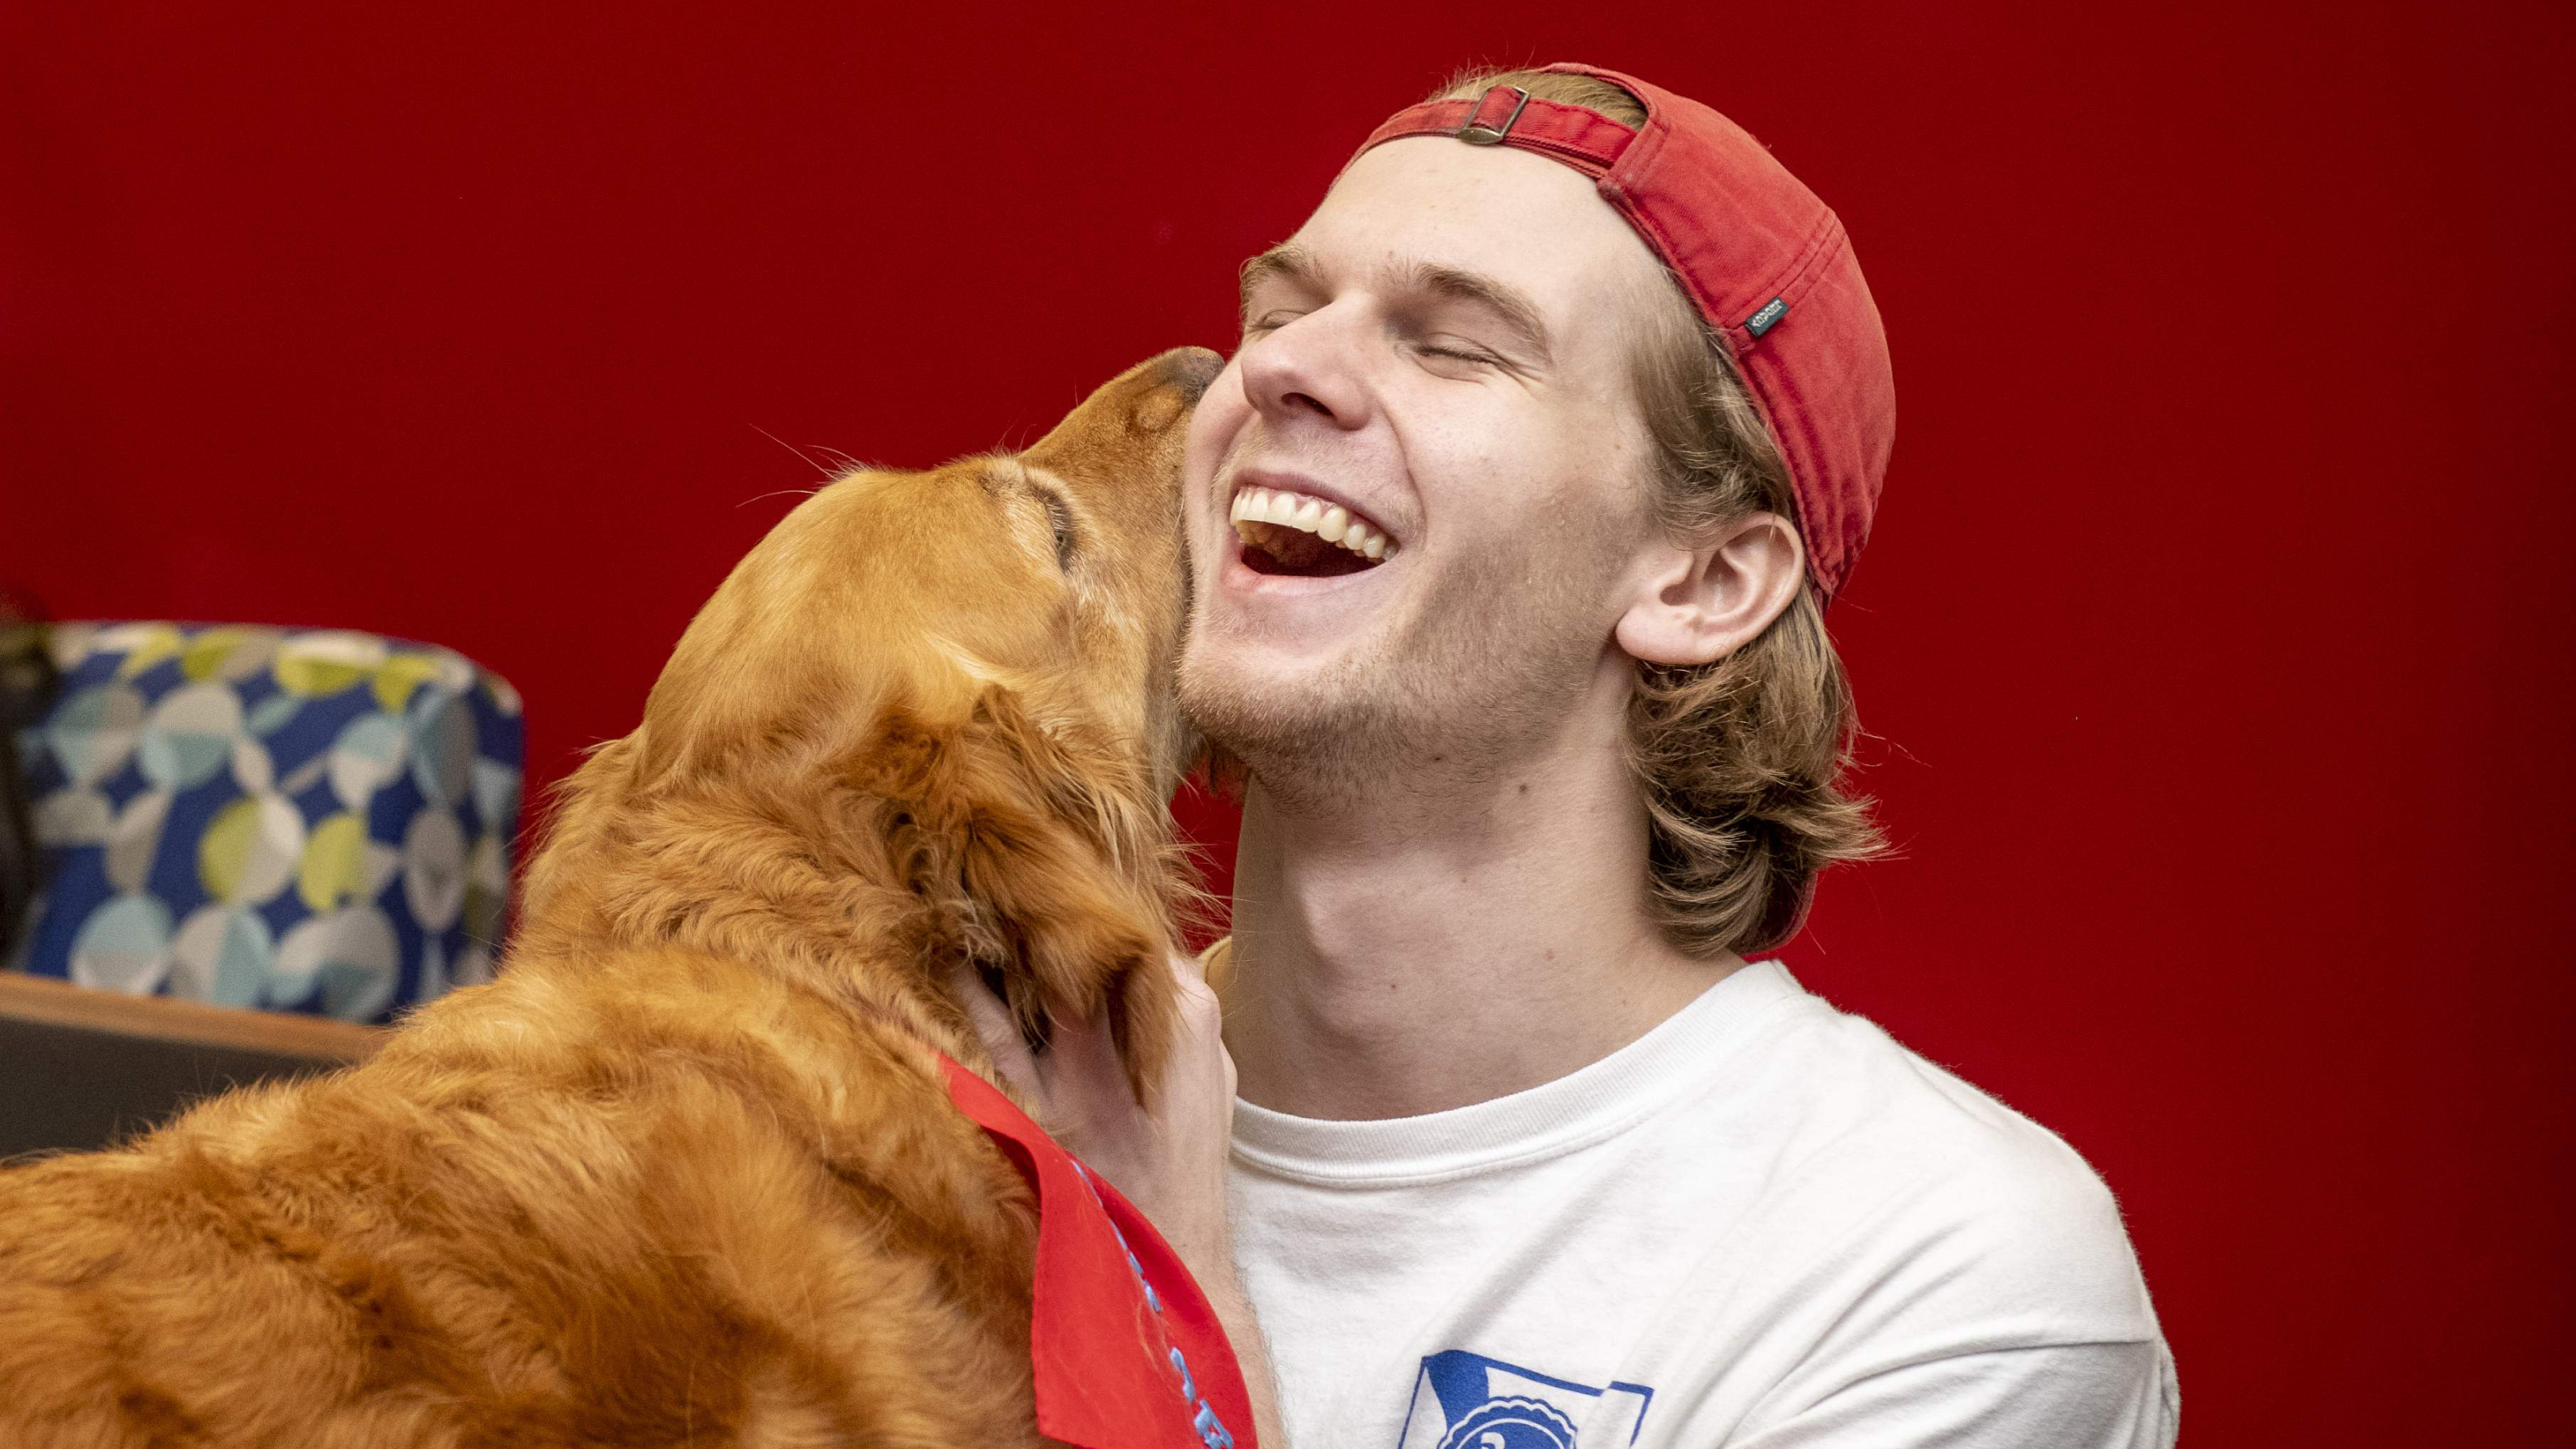 person laughing with dog